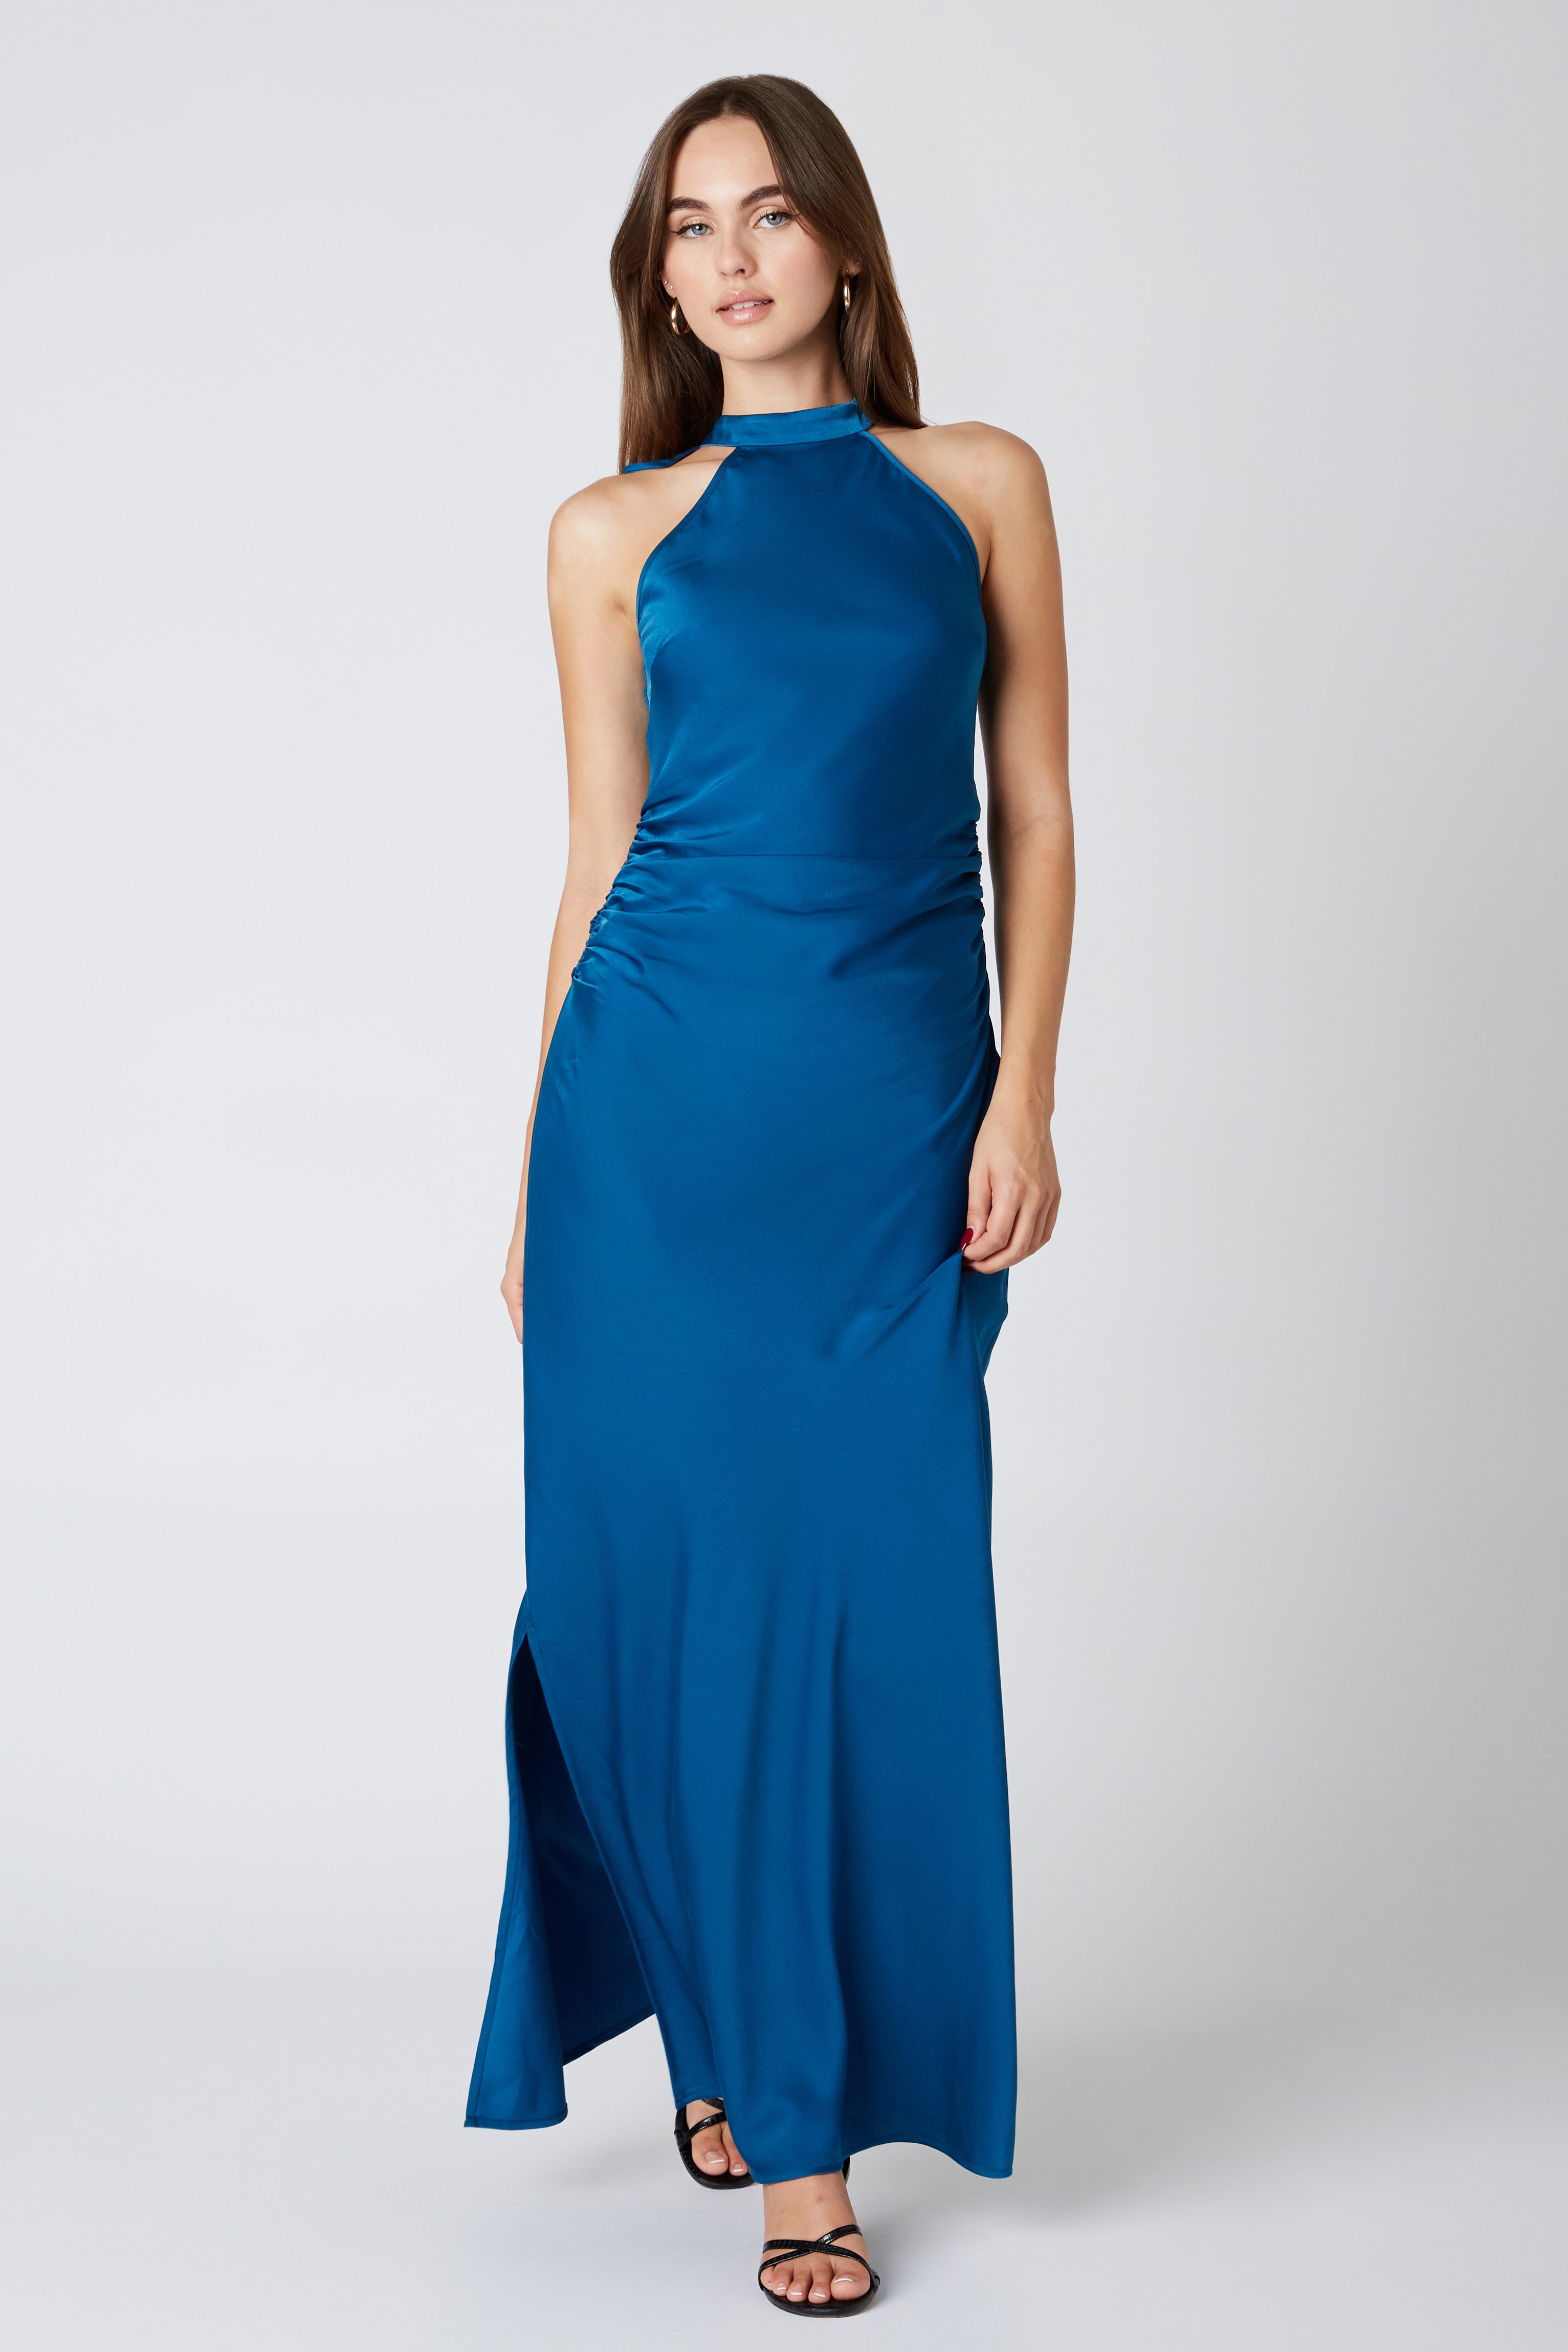 Runway Butterfly Maxi Dress in Teal Blue Front View